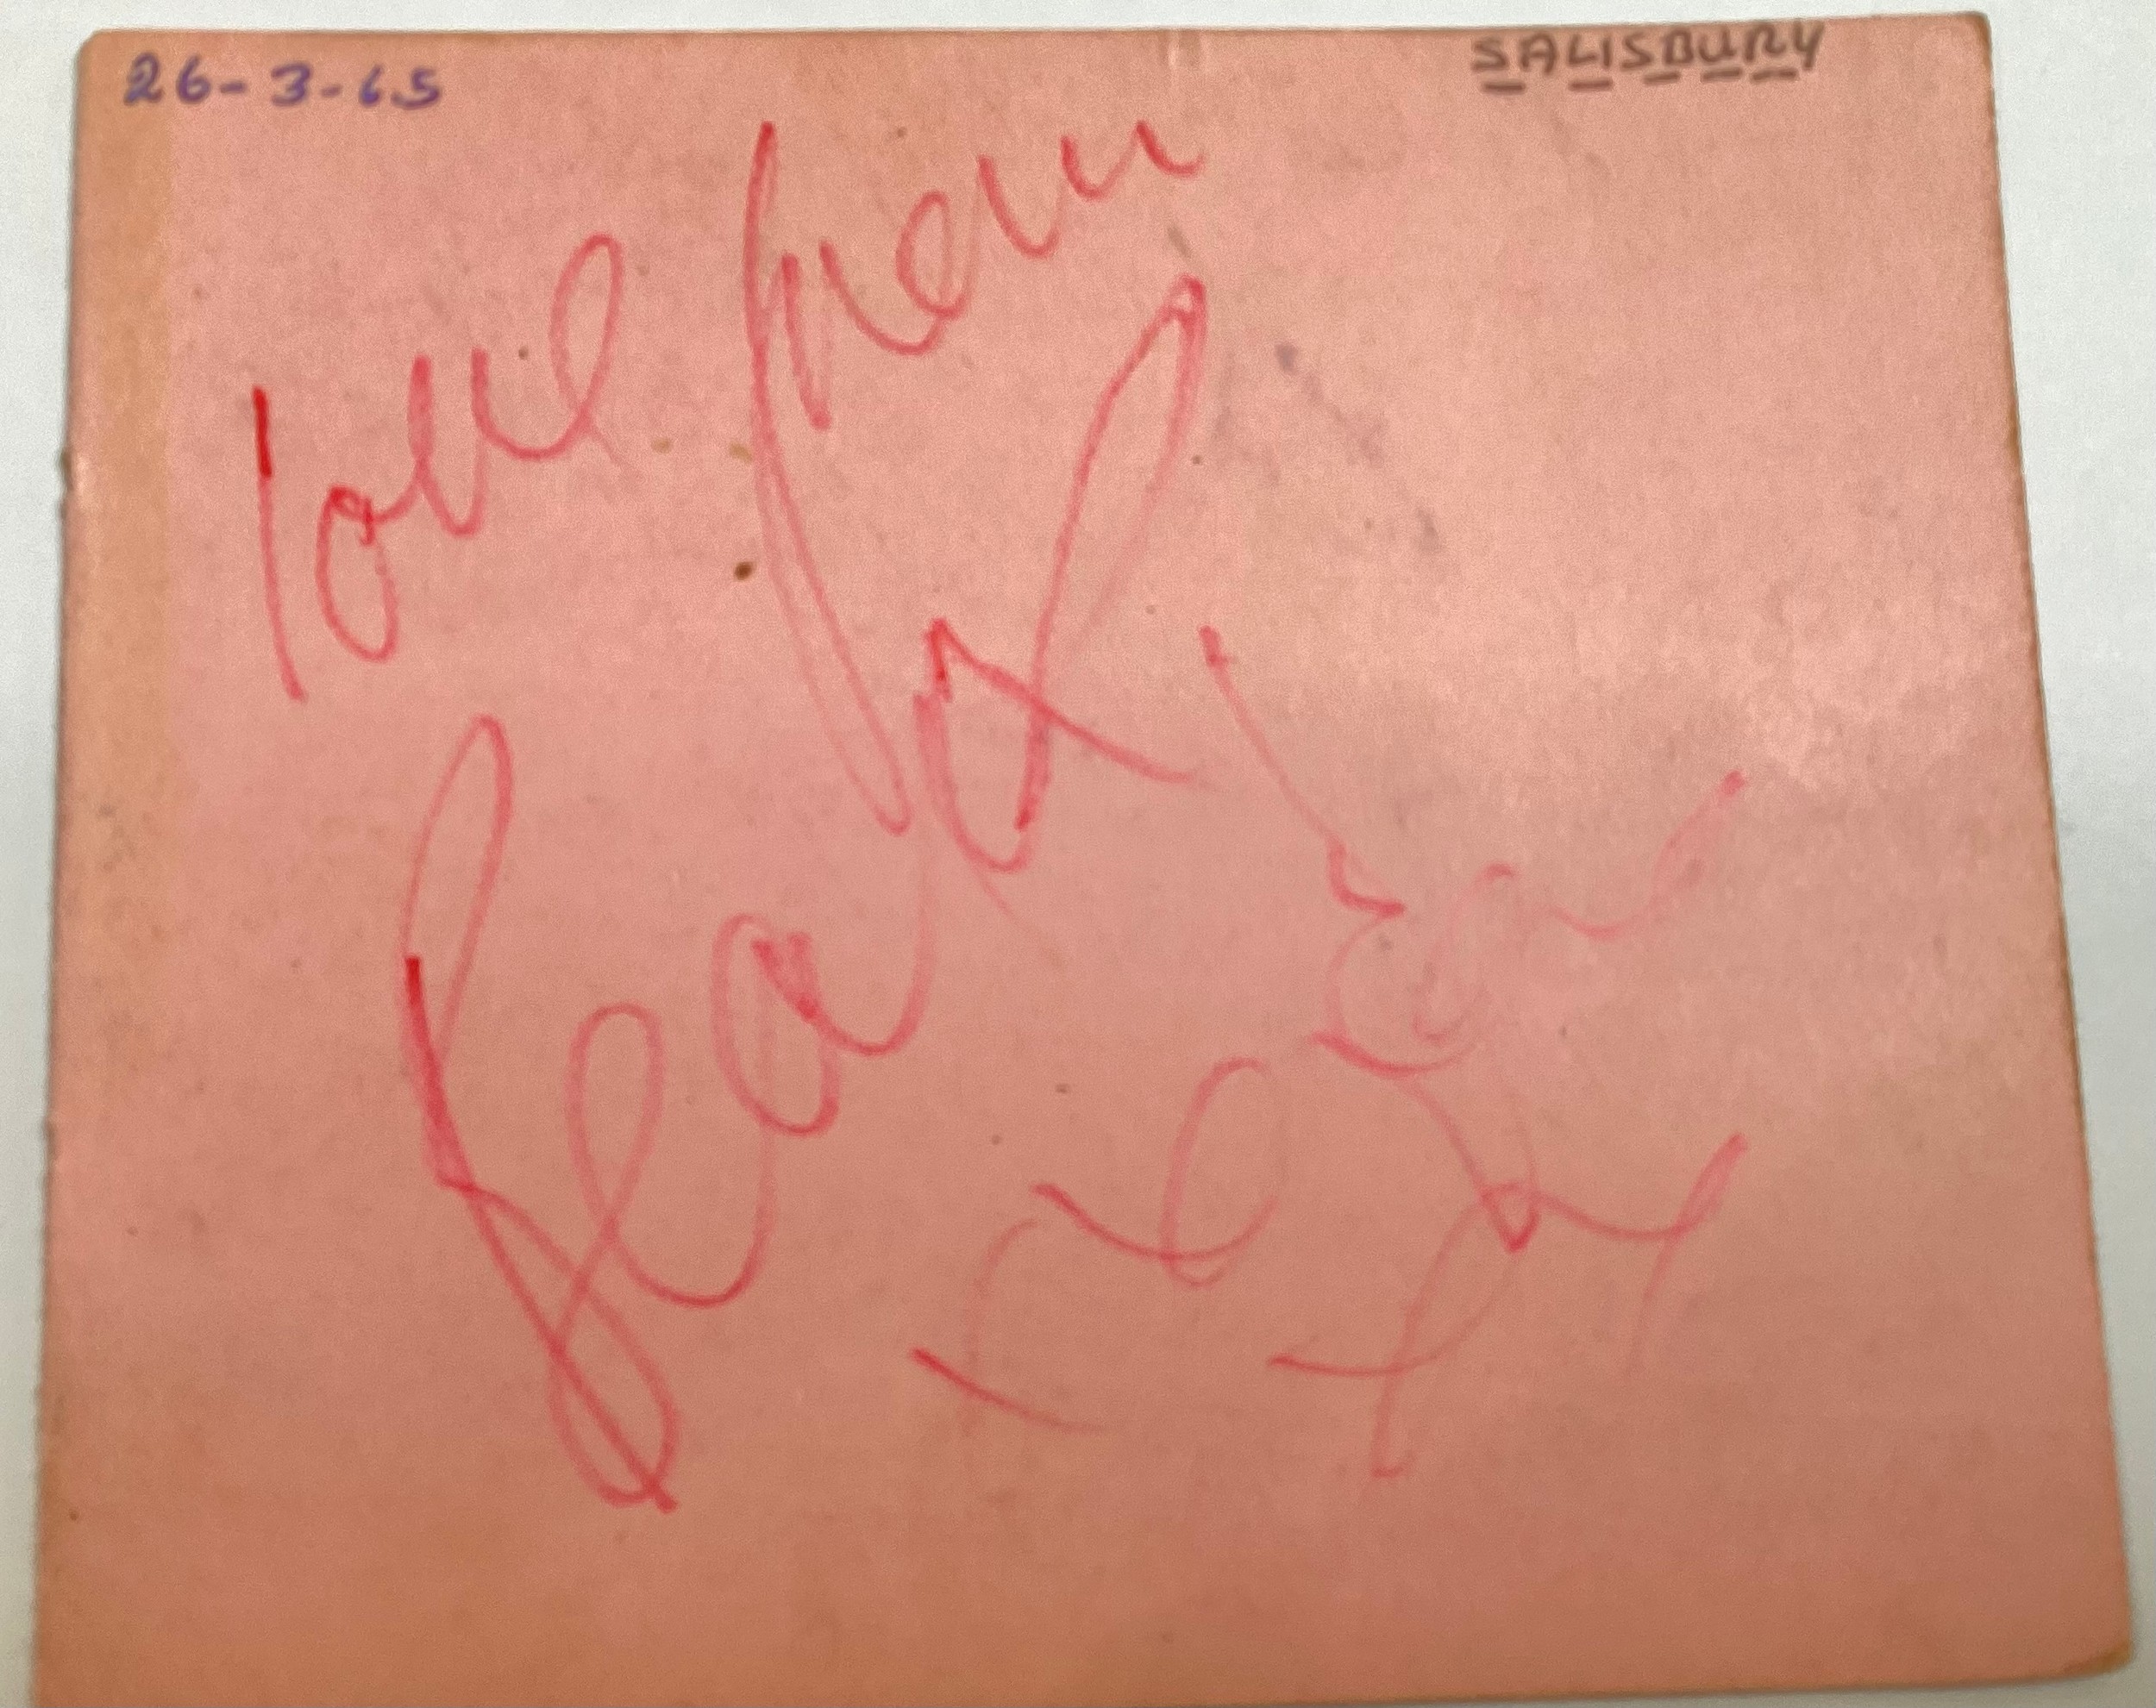 GENUINE 1960’S AUTOGRAPH BOOK CONTAINING VARIOUS POP / ROCK STARS. The book has seen better days - Image 12 of 14